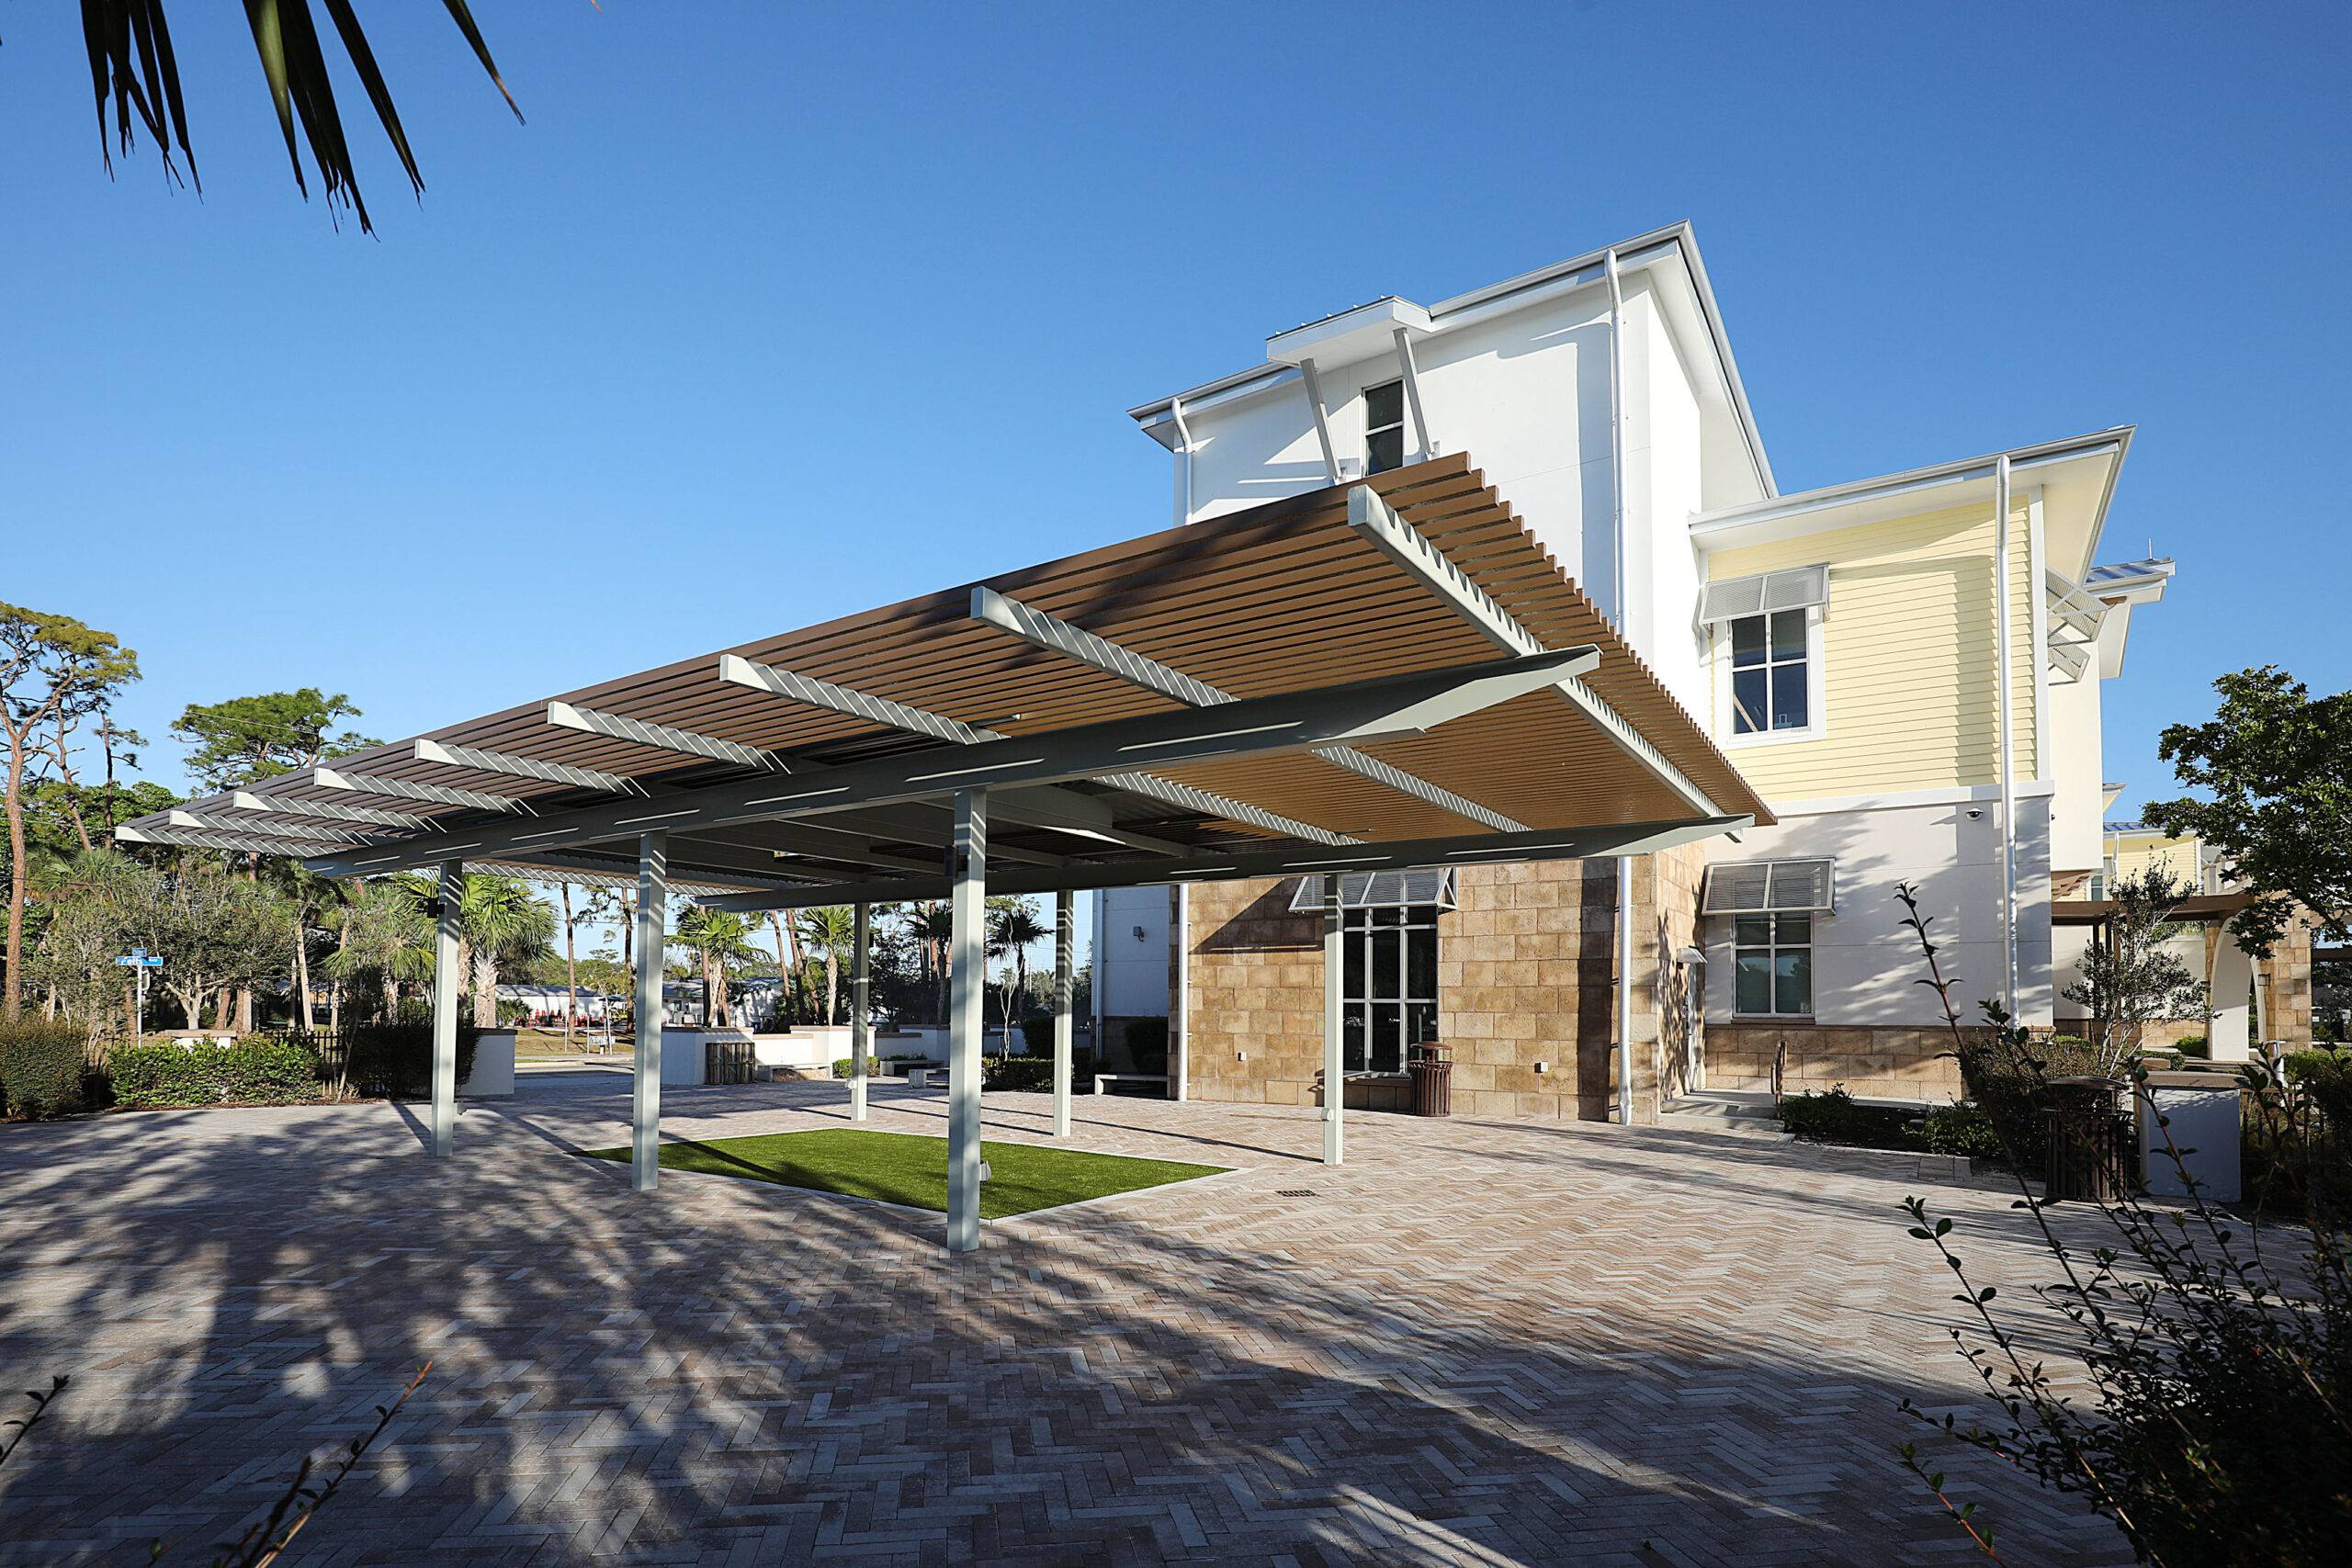 Stevens Construction completes shade structures for Lee County libraries